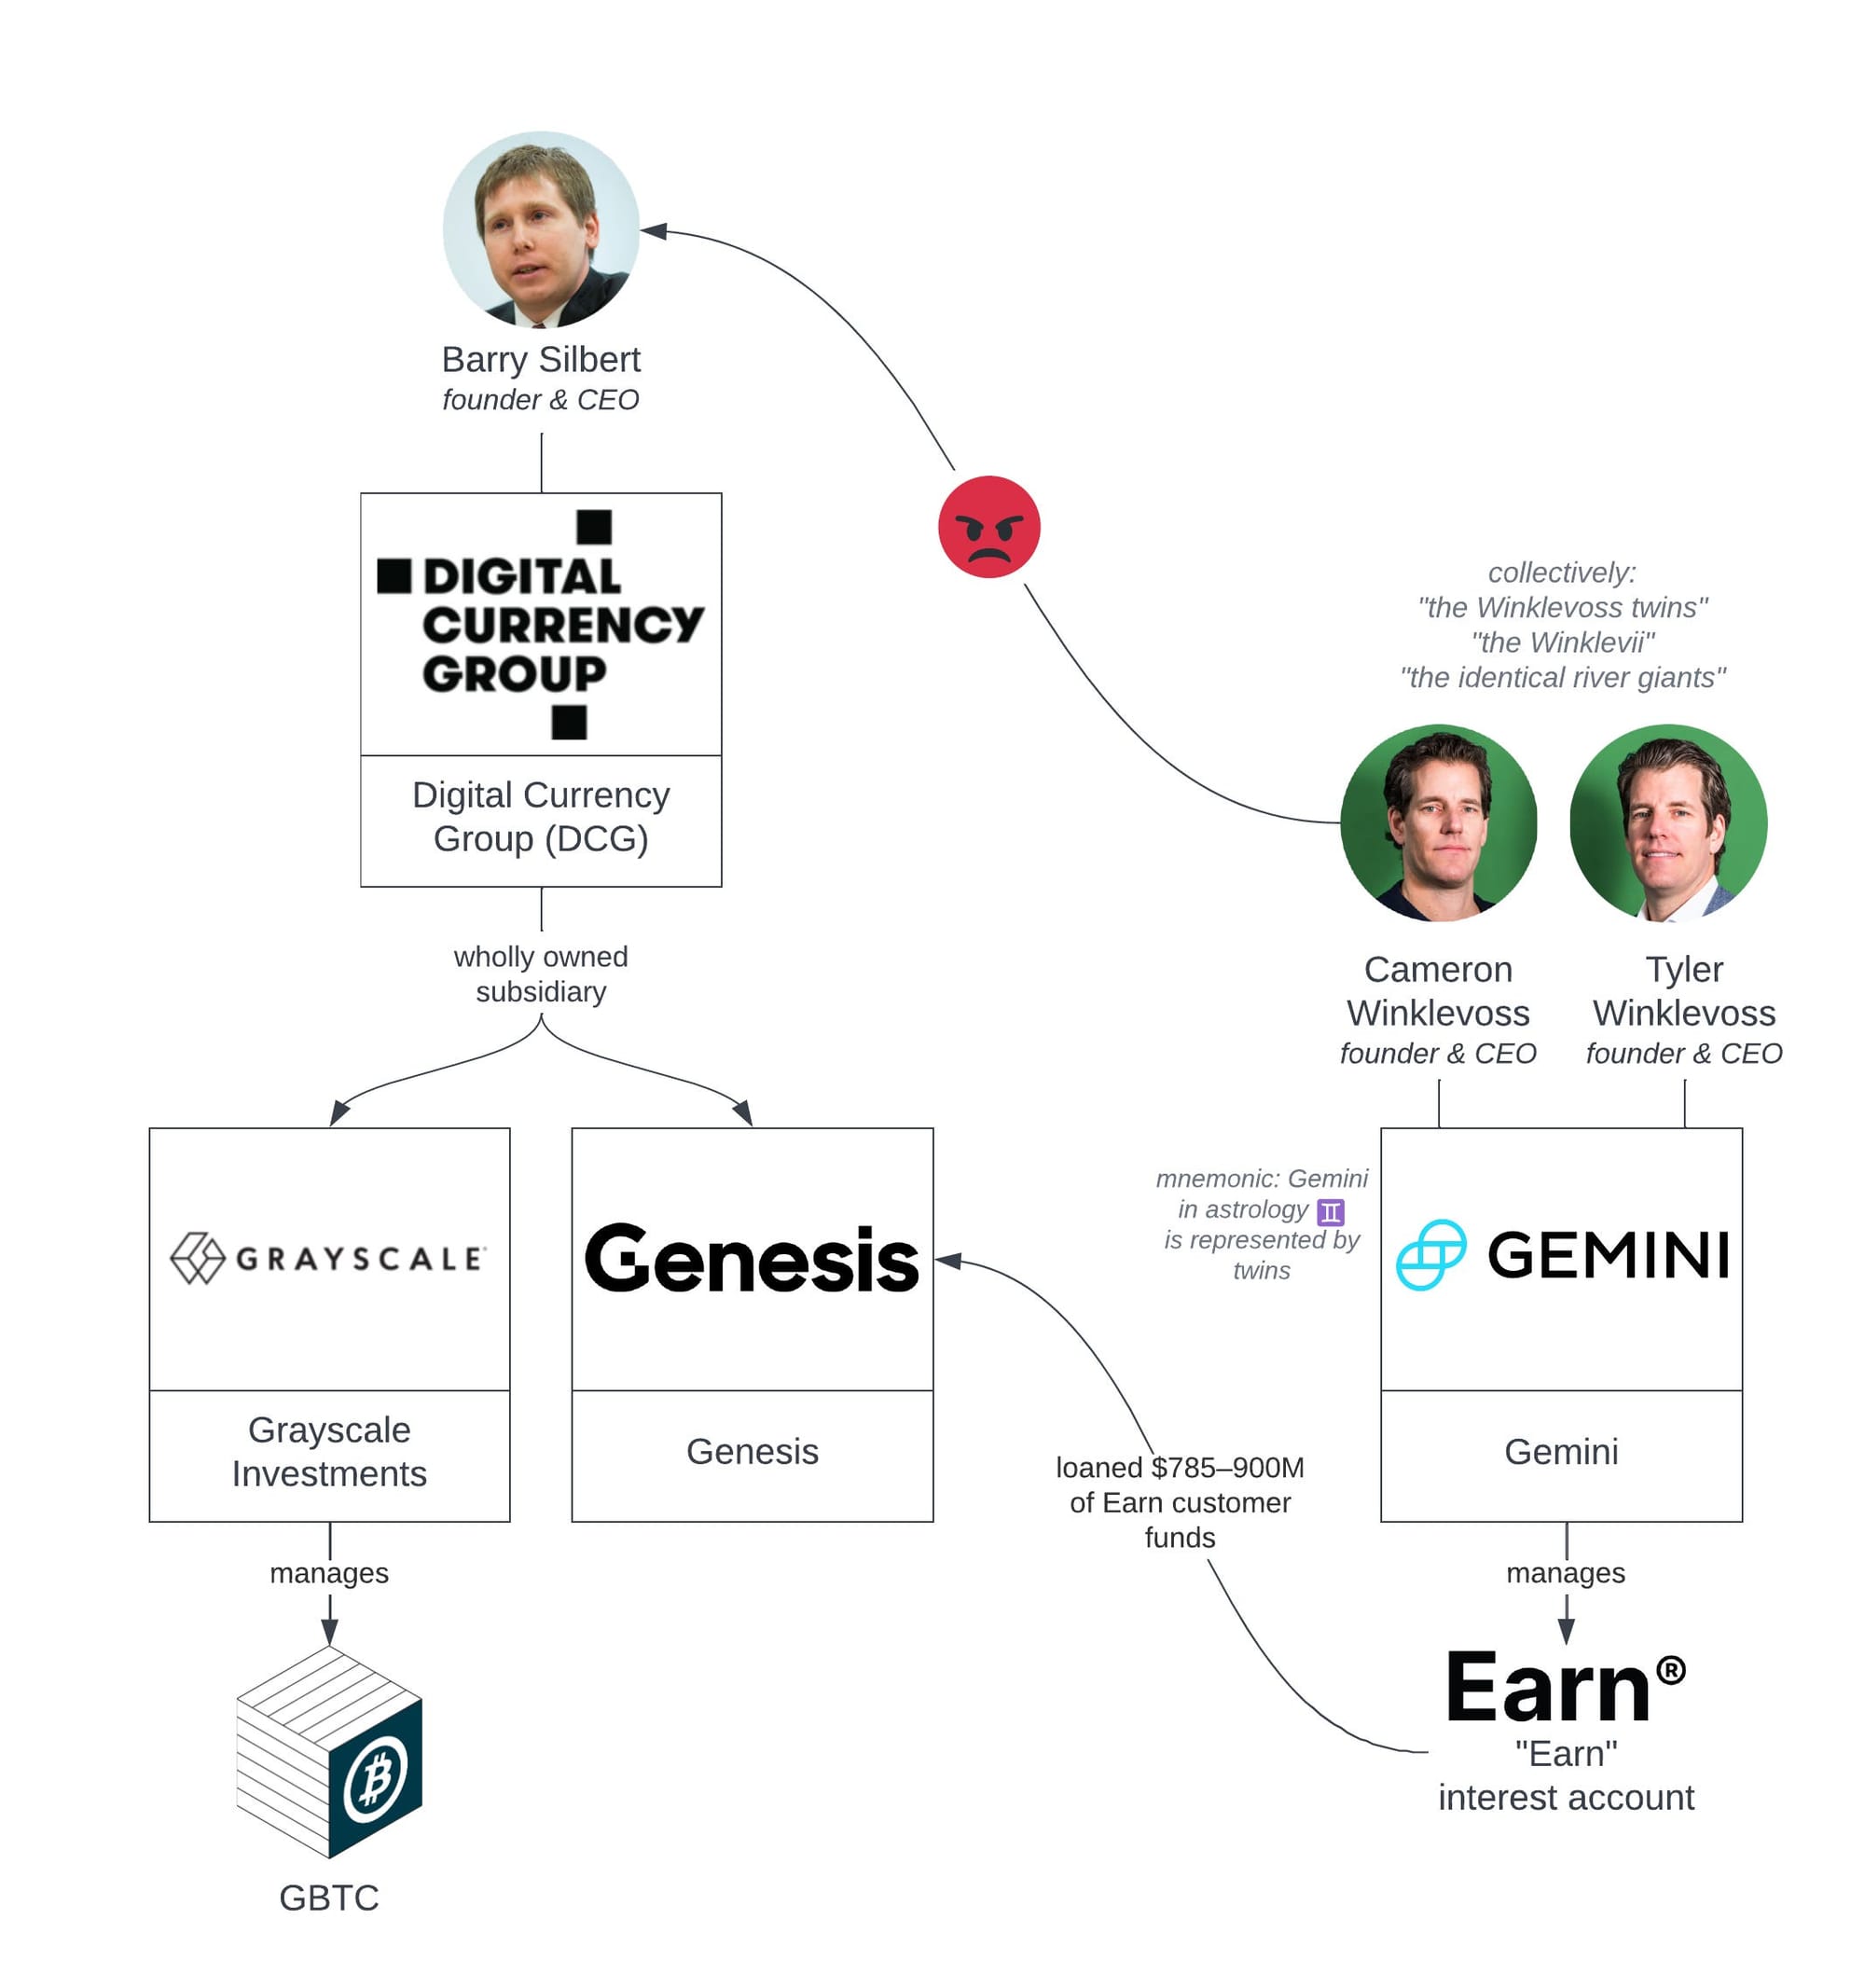 A diagram showing that Digital Currency Group (aka DCG) was founded by CEO Barry Silbert. Grayscale Investments and Genesis are wholly owned subsidiaries of DCG. Grayscale Investments manages GBTC, the Grayscale Bitcoin Trust. Separately, there is Gemini, which was founded by co-CEOs Cameron and Tyler Winklevoss (also known as "the Winklevoss twins", "the Winklevii", and "the identical river giants"). Gemini manages the Gemini Earn program, which loaned $785–900M in customer funds to Genesis. The Winklevoss twins are angry at Barry Silbert. As a mnemonic, Gemini in astrology is represented by twins.